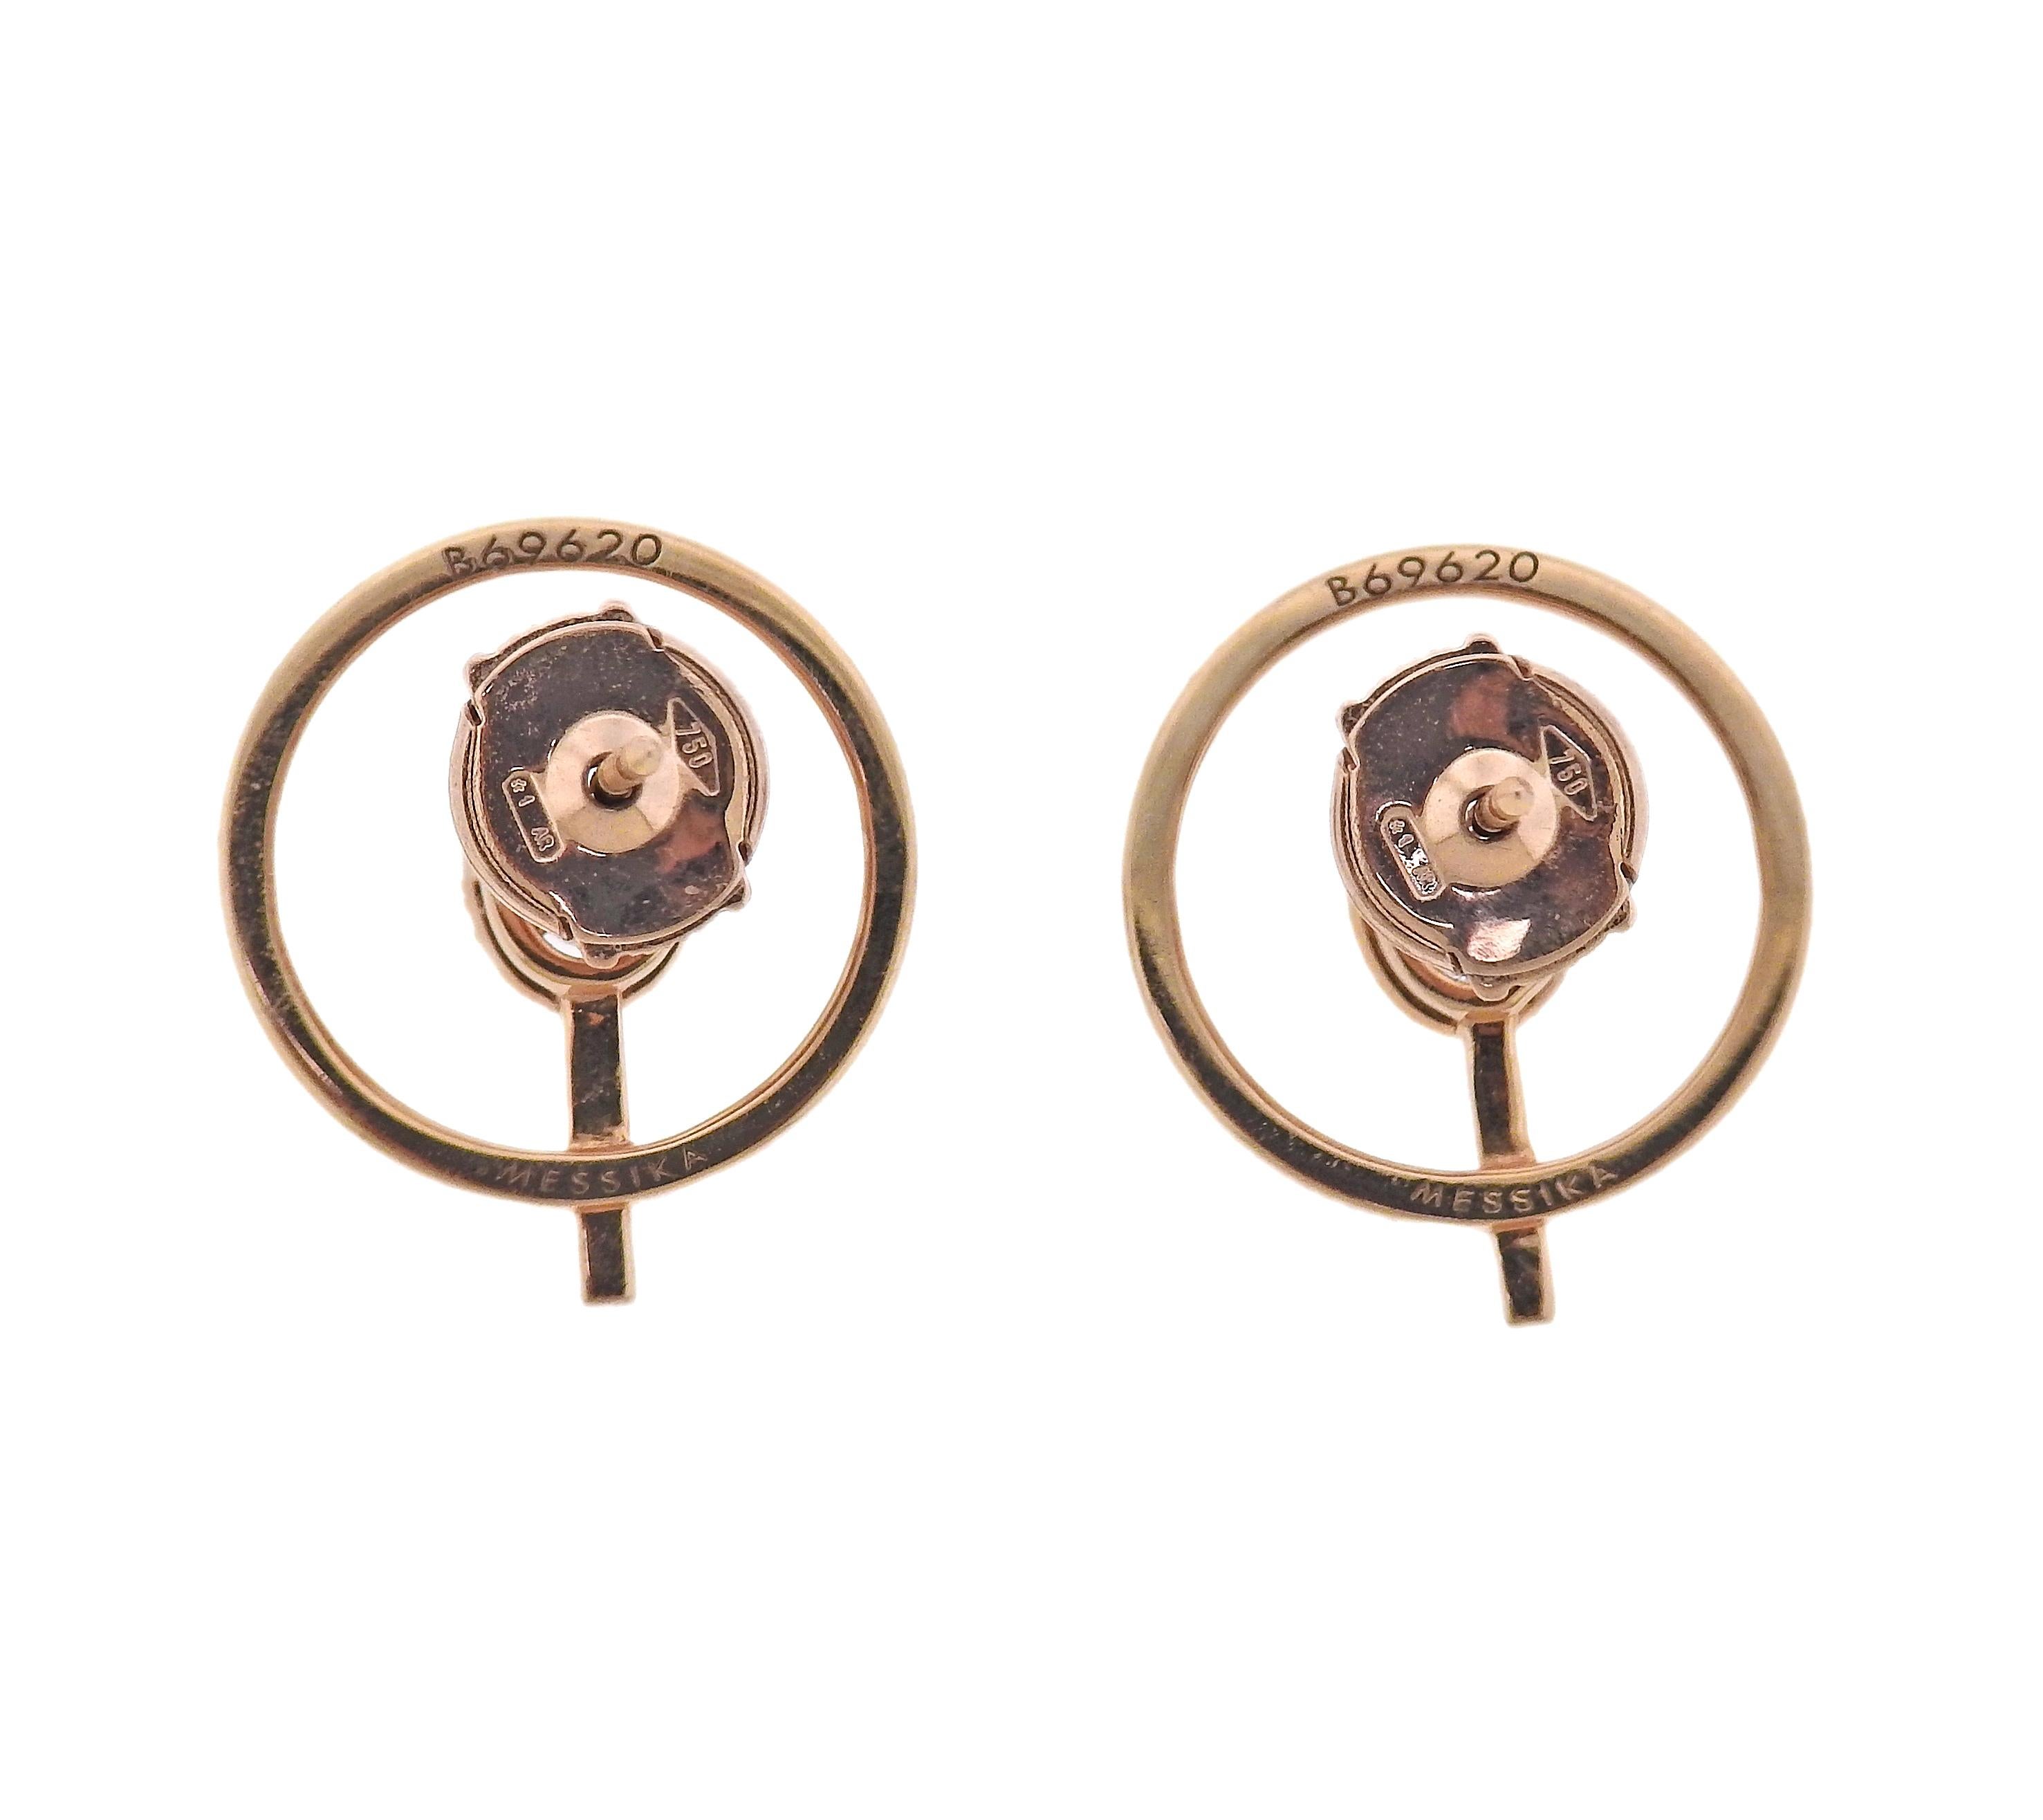 Pair of 18k rose gold Glam'Azone earrings by Messika, with 0.36ctw G/VS diamonds. New, Store sample, with box. Retail $3300. Earrings are 16mm in diameter. Weight - 3.8 grams. Marked: Messika , 750, Serial number. 